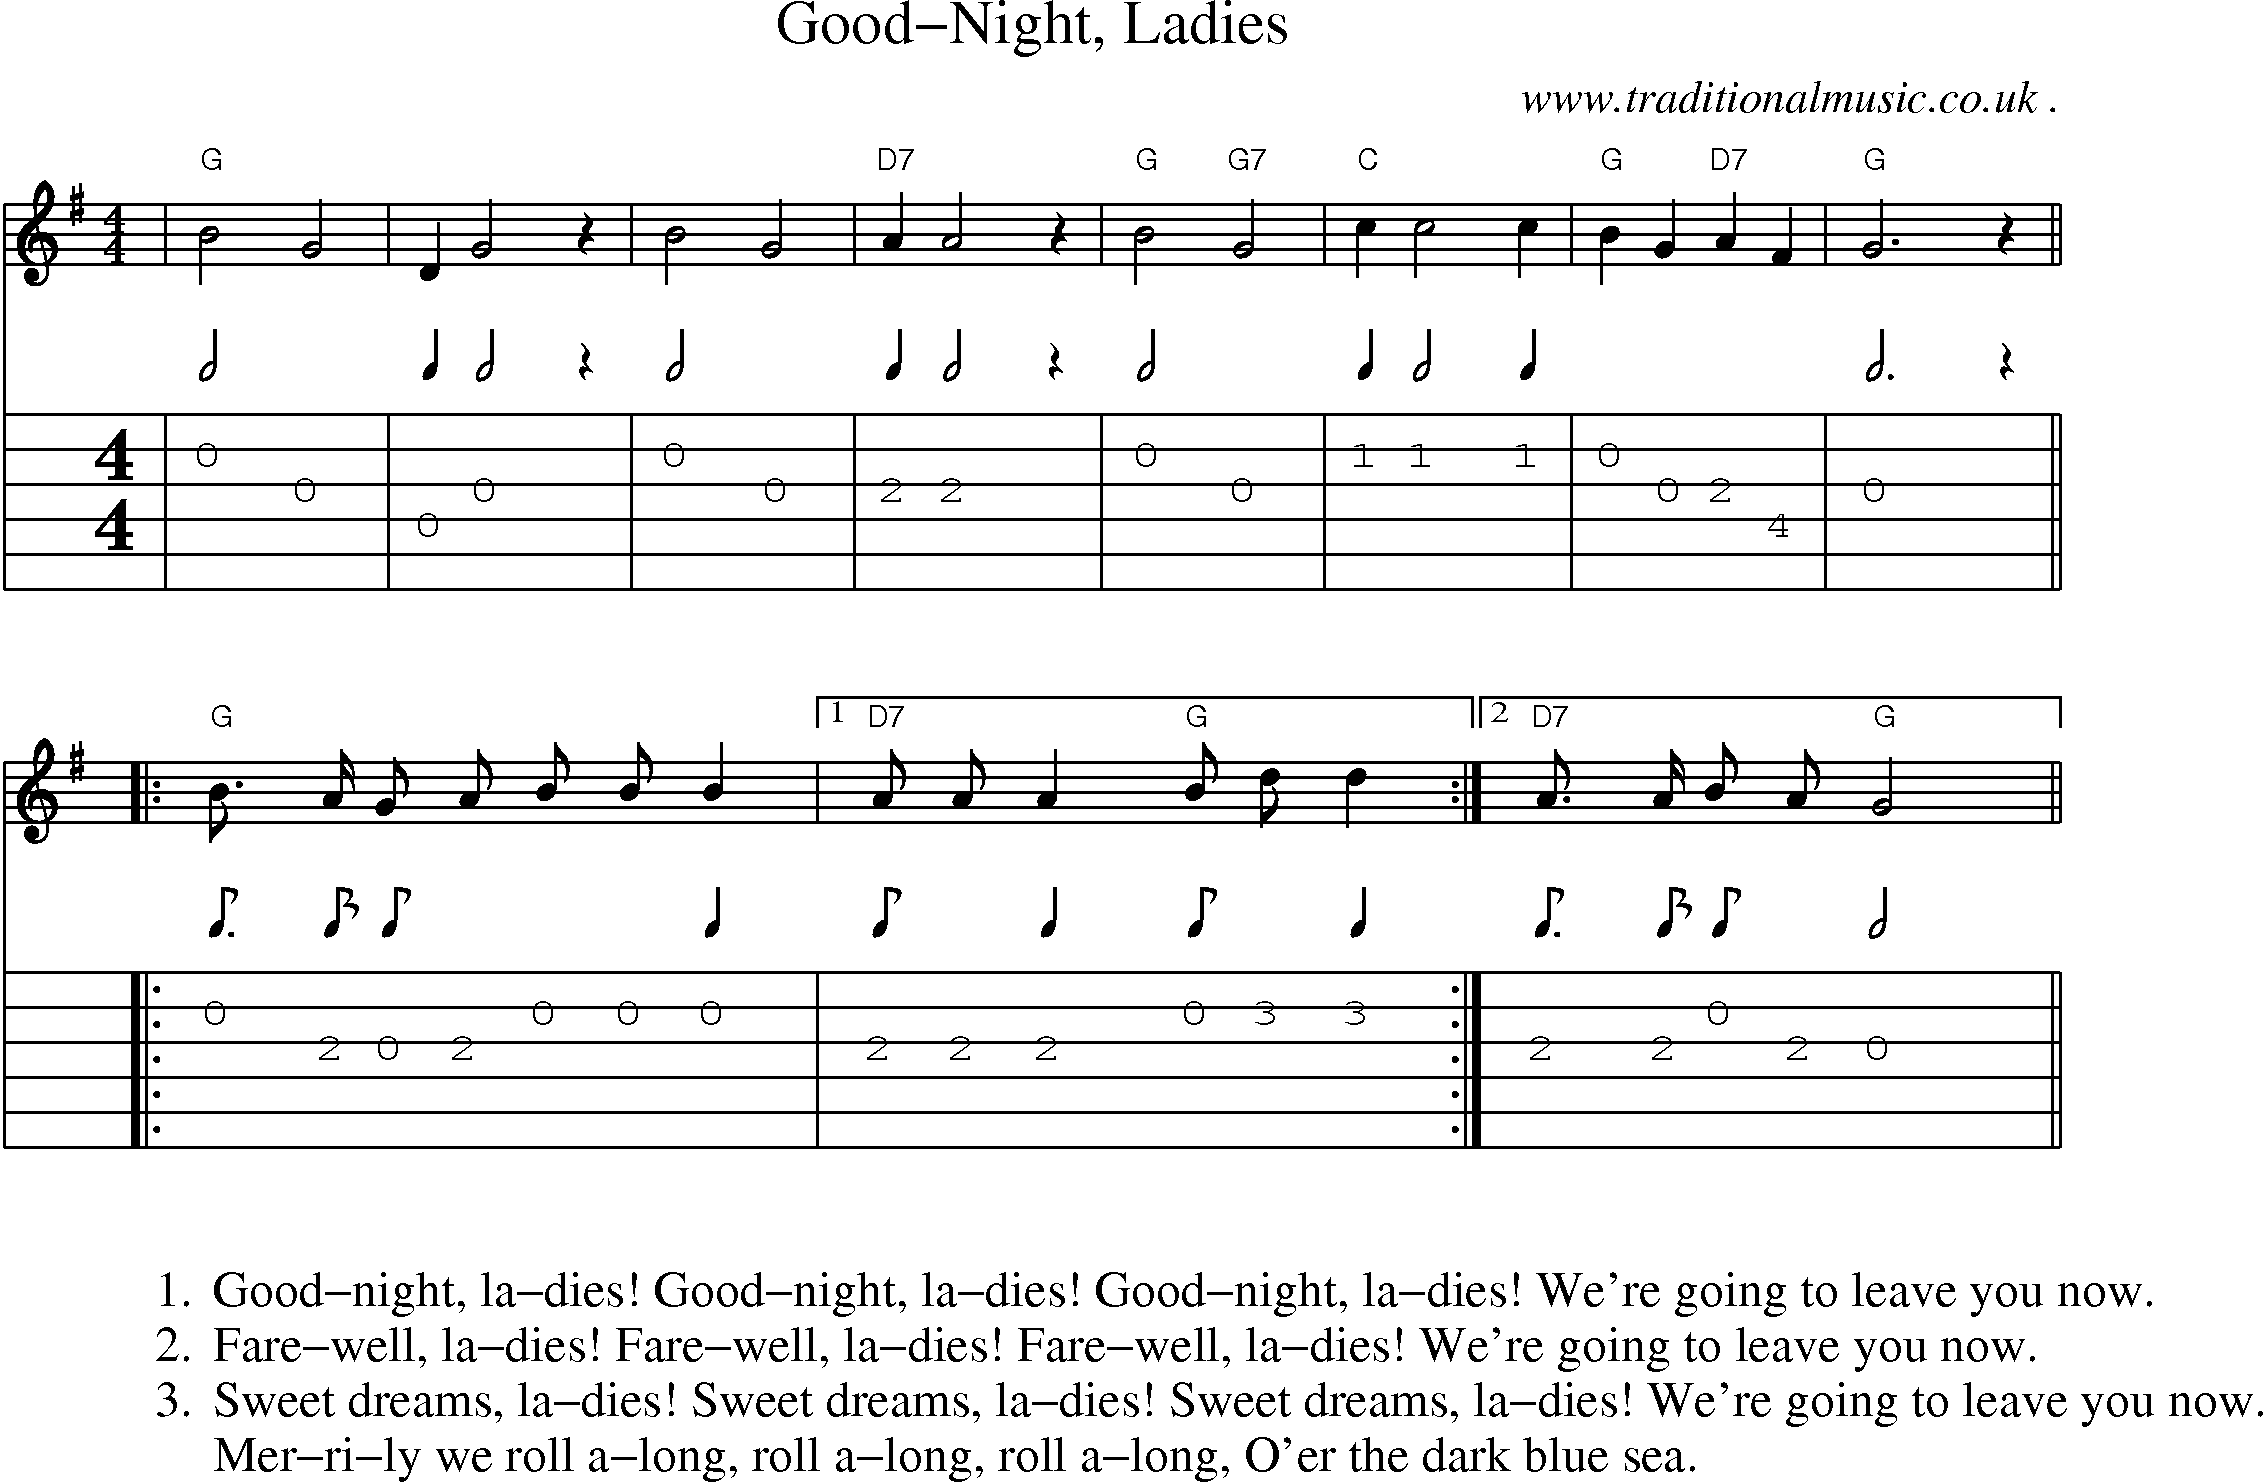 Music Score and Guitar Tabs for Good-night Ladies